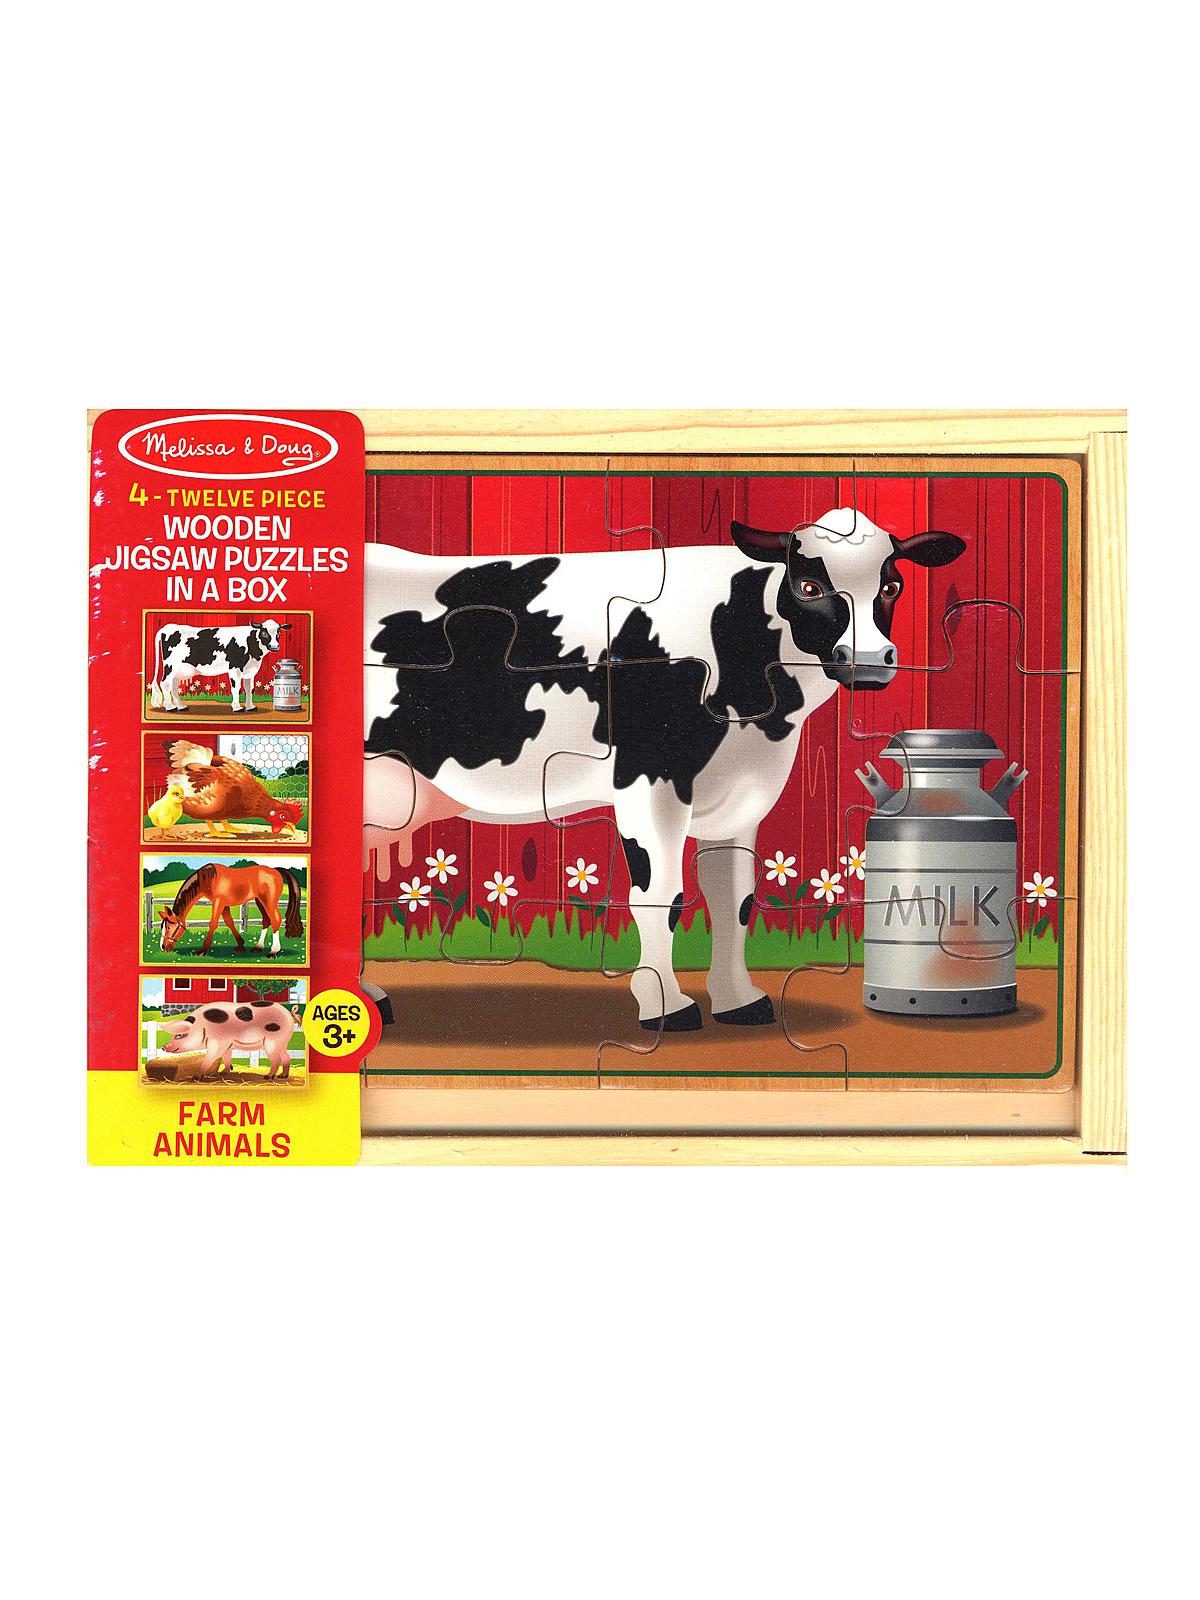 Wooden Puzzles In A Box Farm Animals 4 Puzzles, 12 Pieces Each